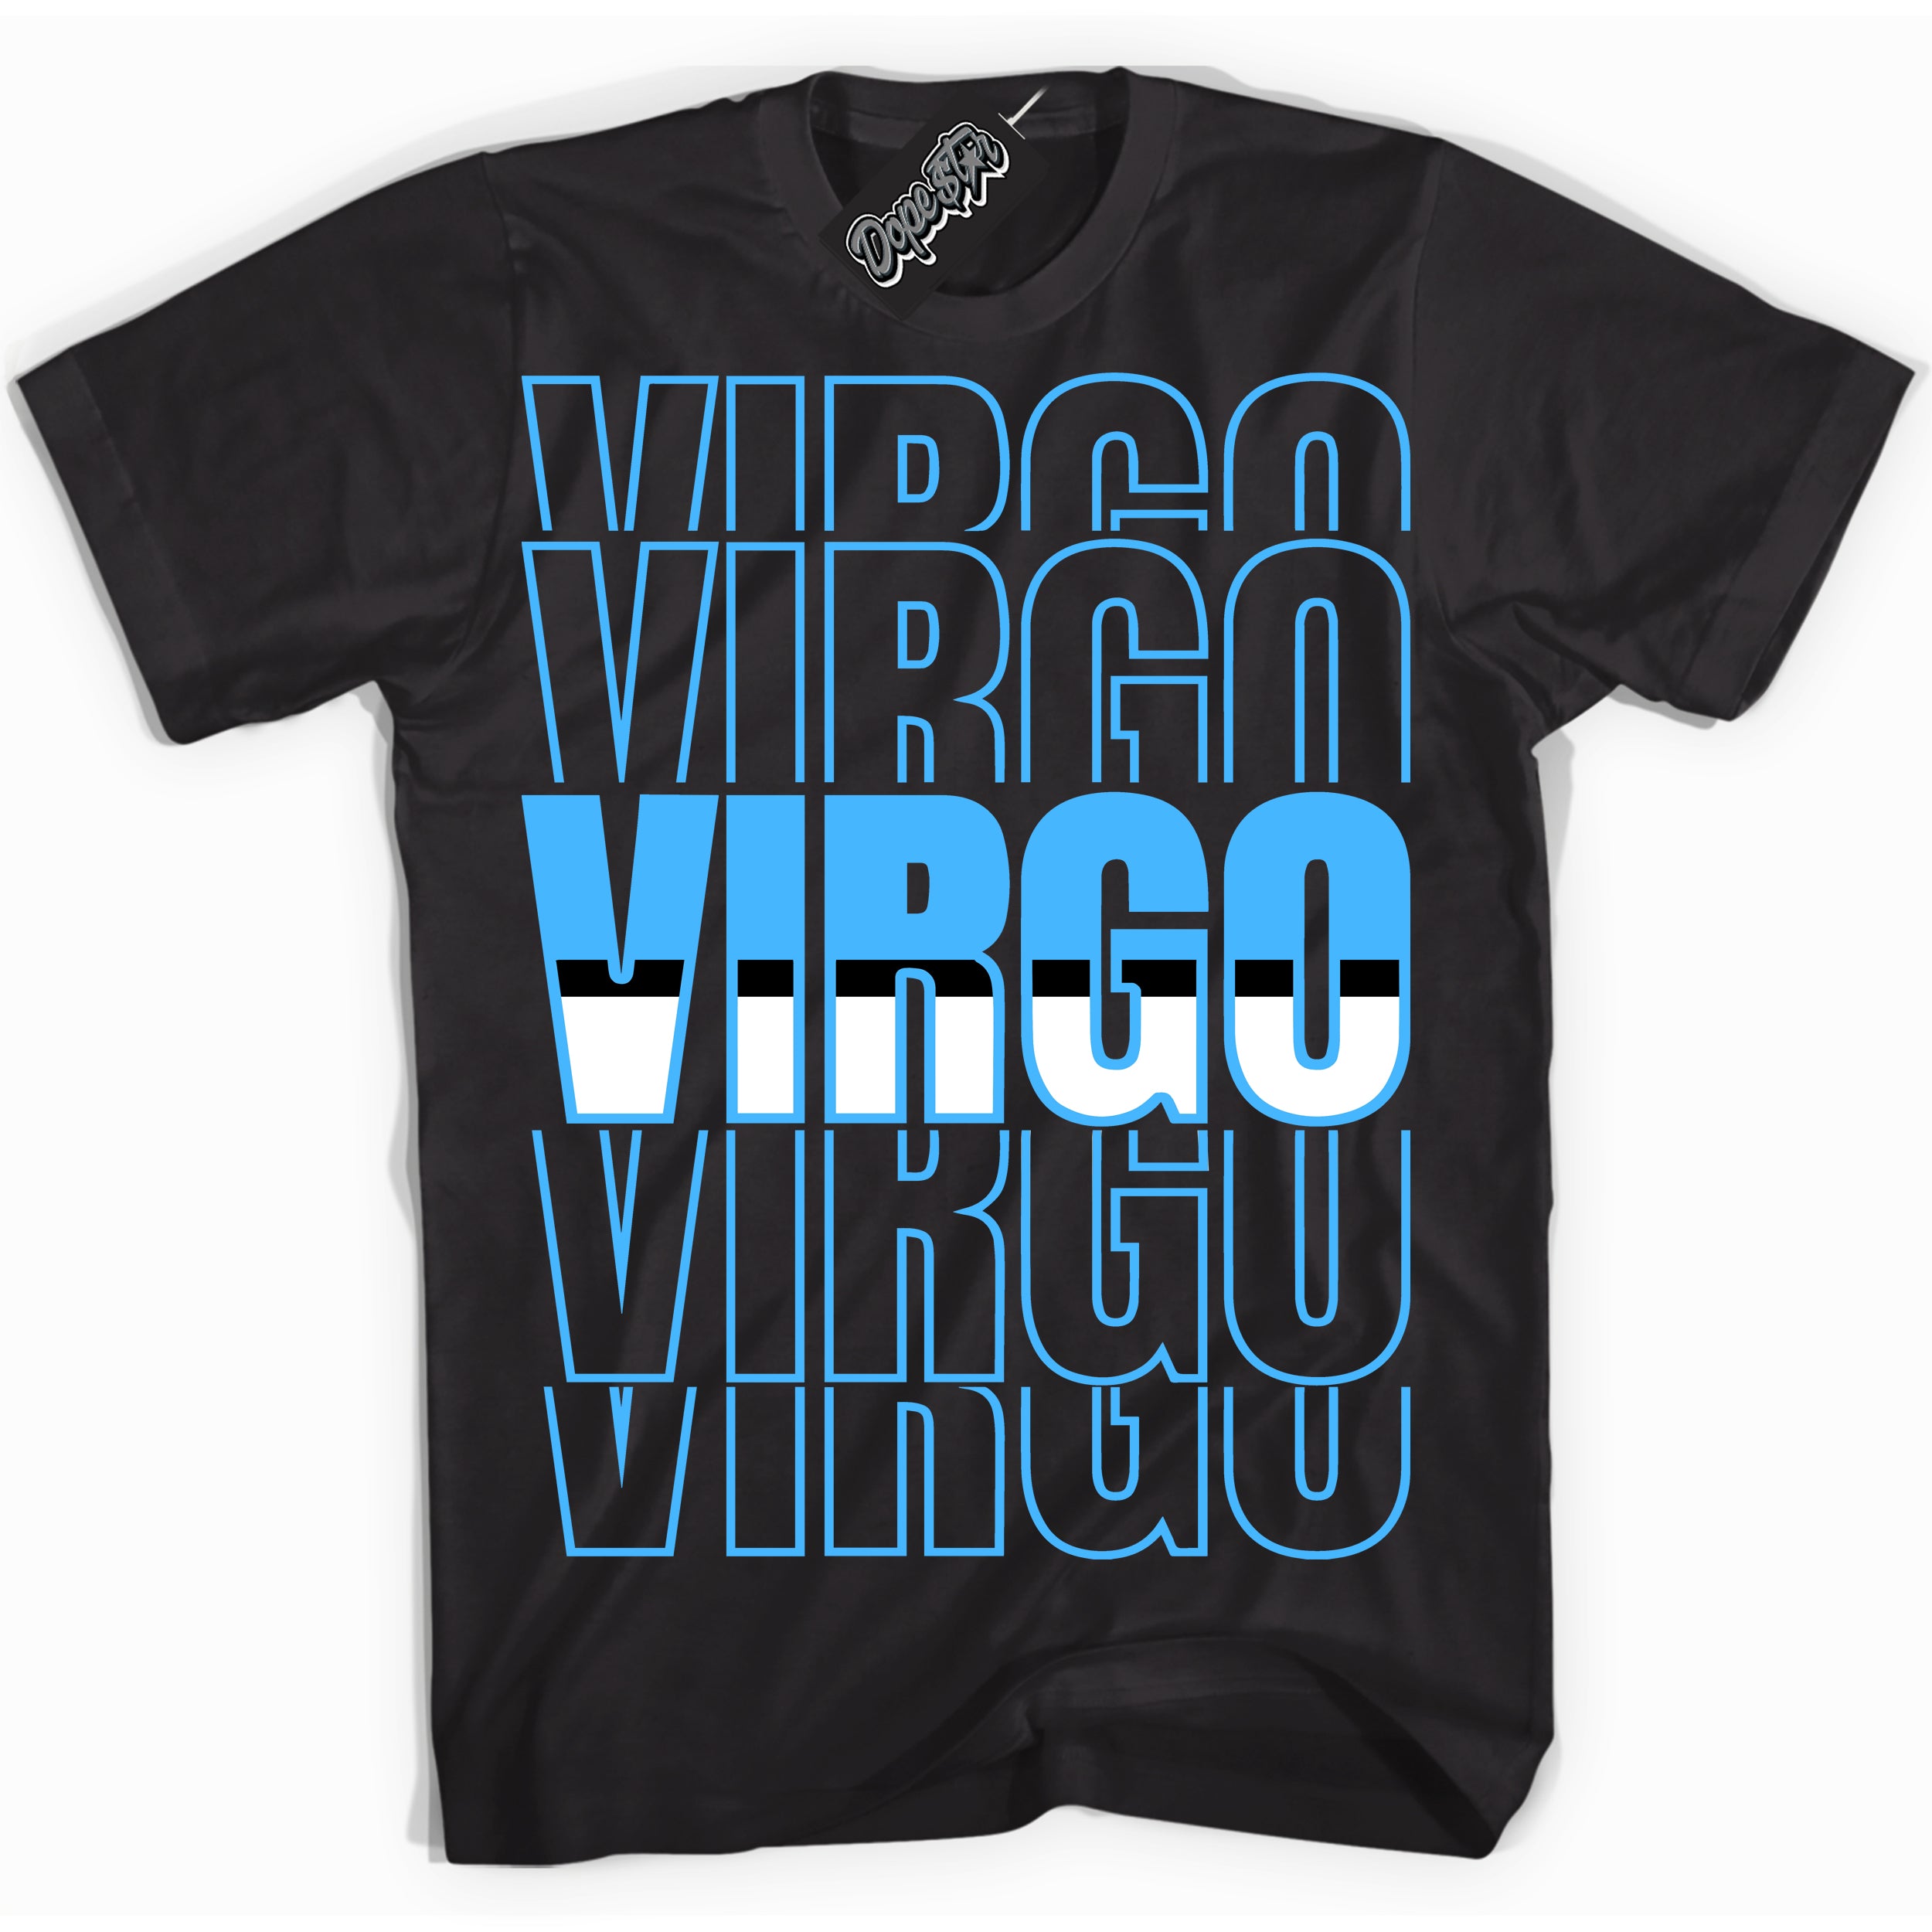 Cool Black graphic tee with “ Virgo ” design, that perfectly matches Powder Blue 9s sneakers 